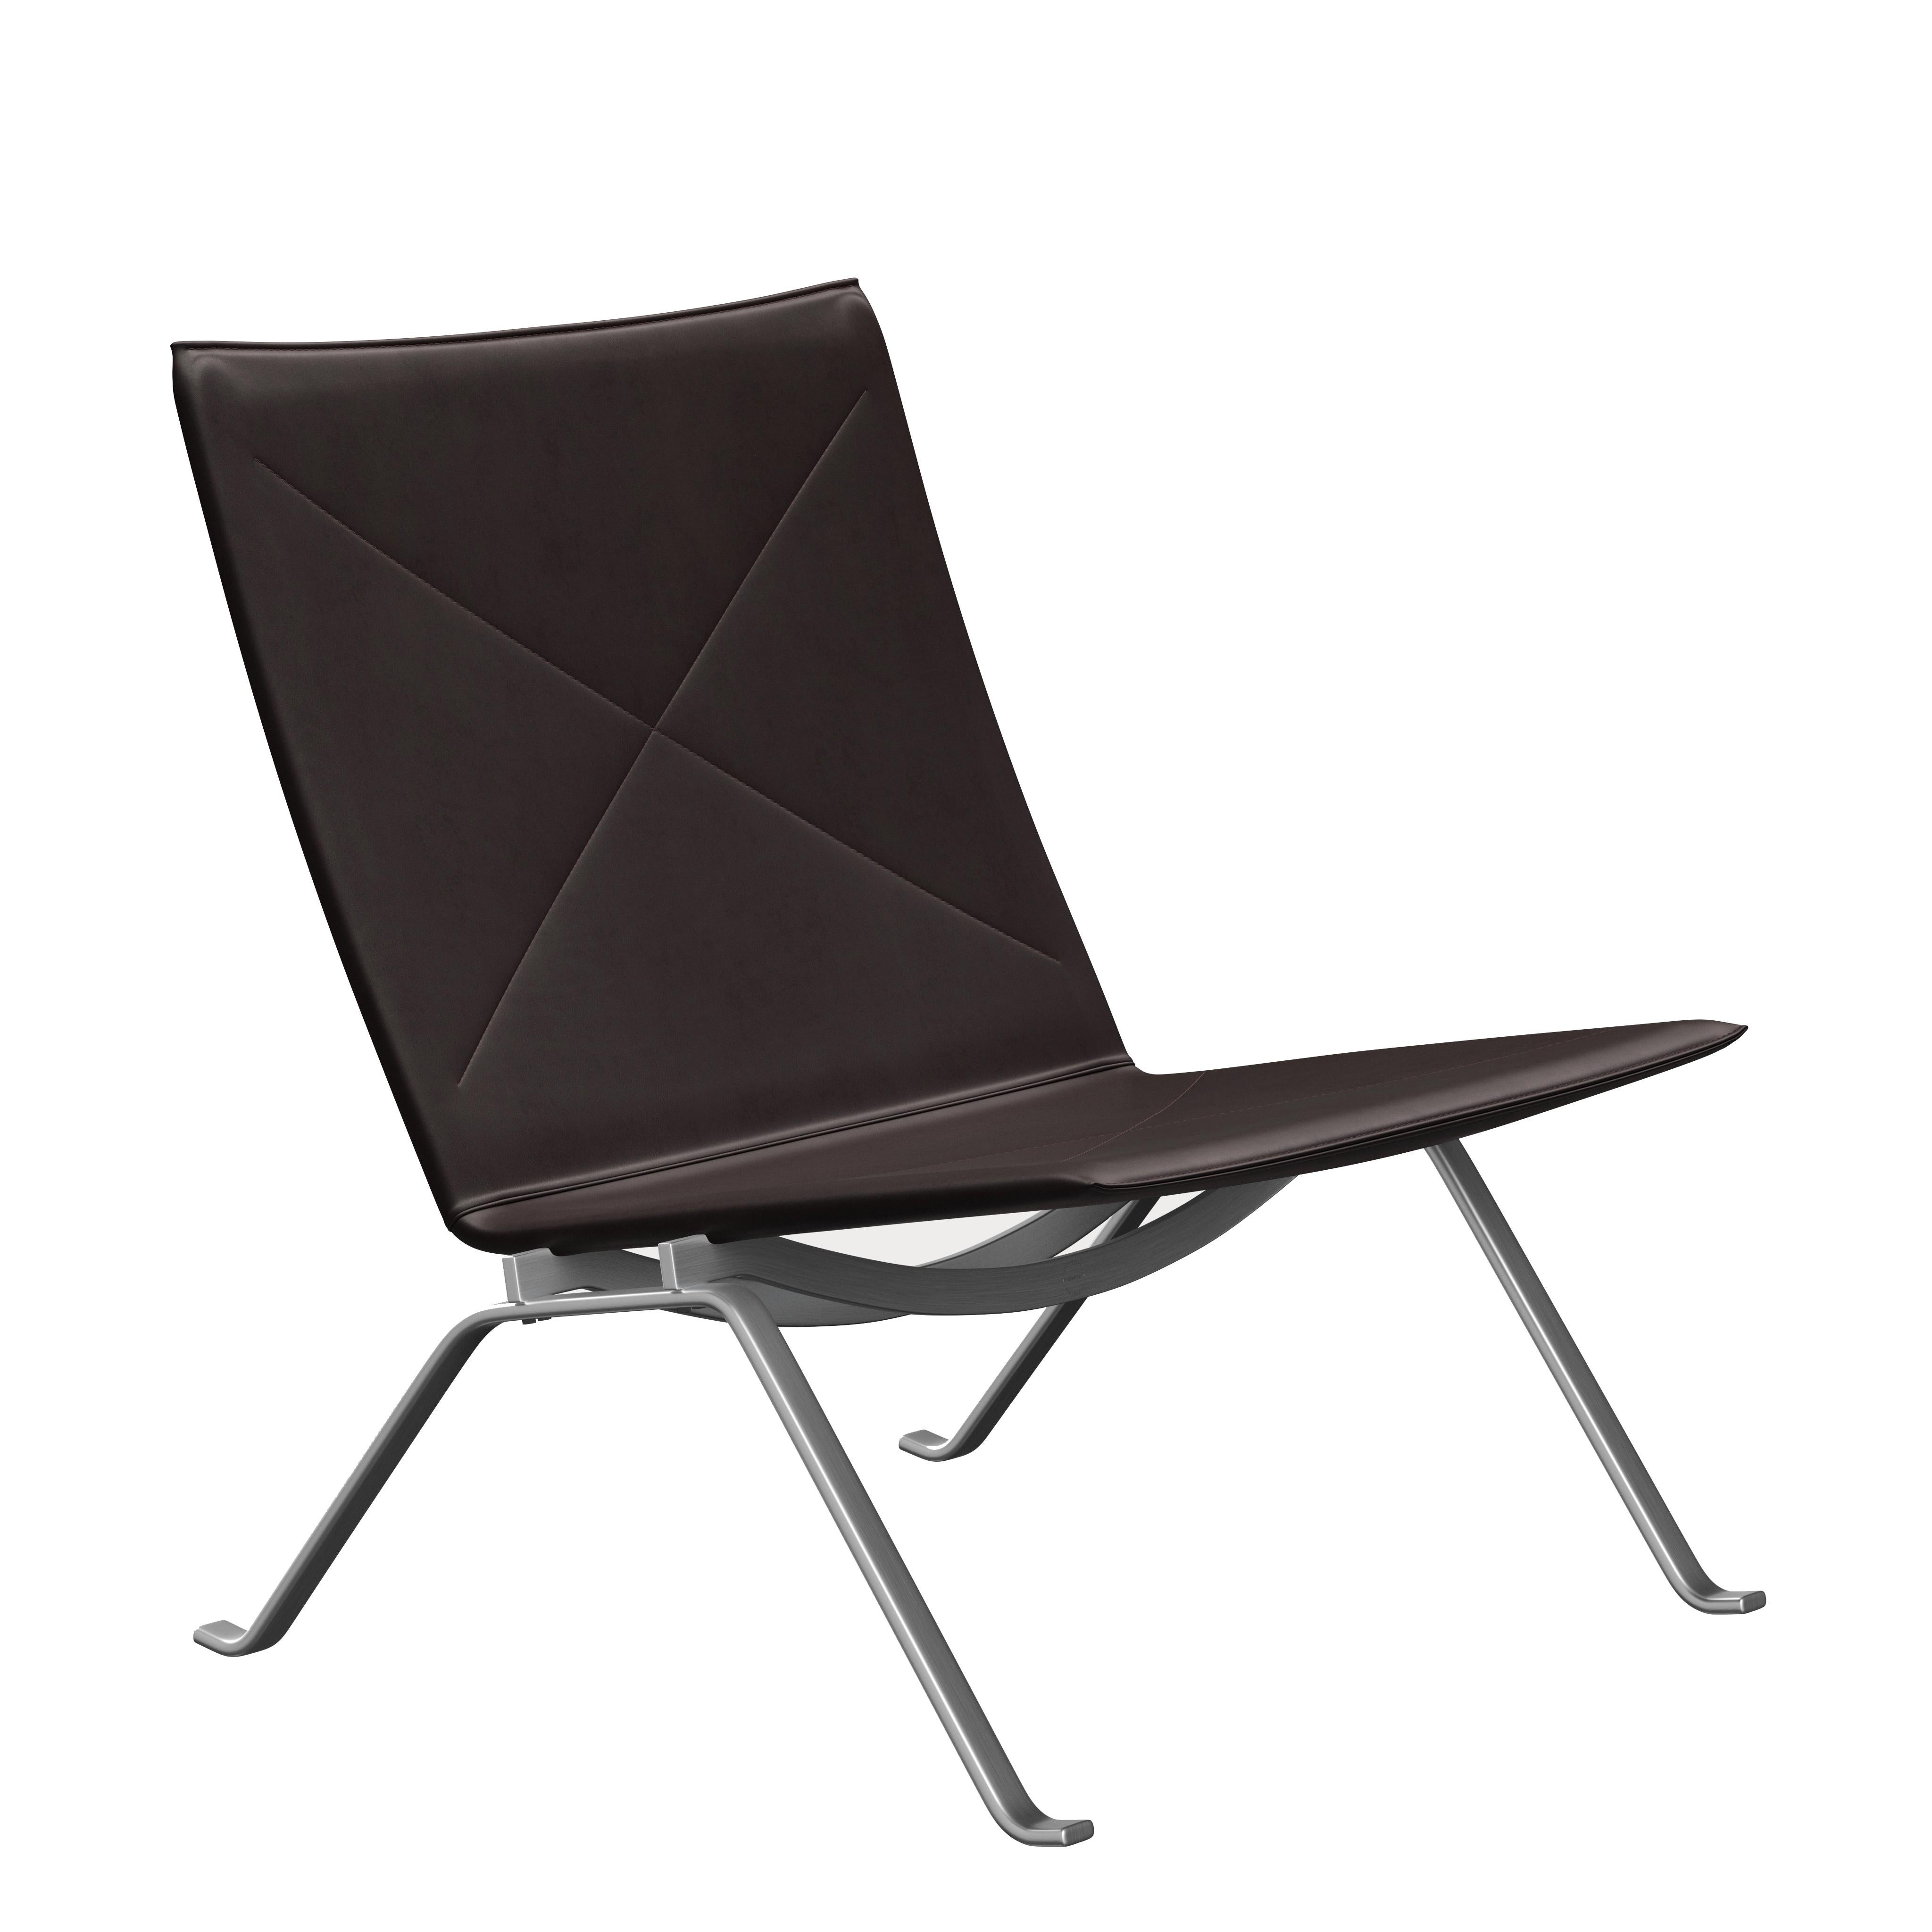 Poul Kjærholm 'PK22' Lounge Chair for Fritz Hansen in Leather (Cat. 5) For Sale 7